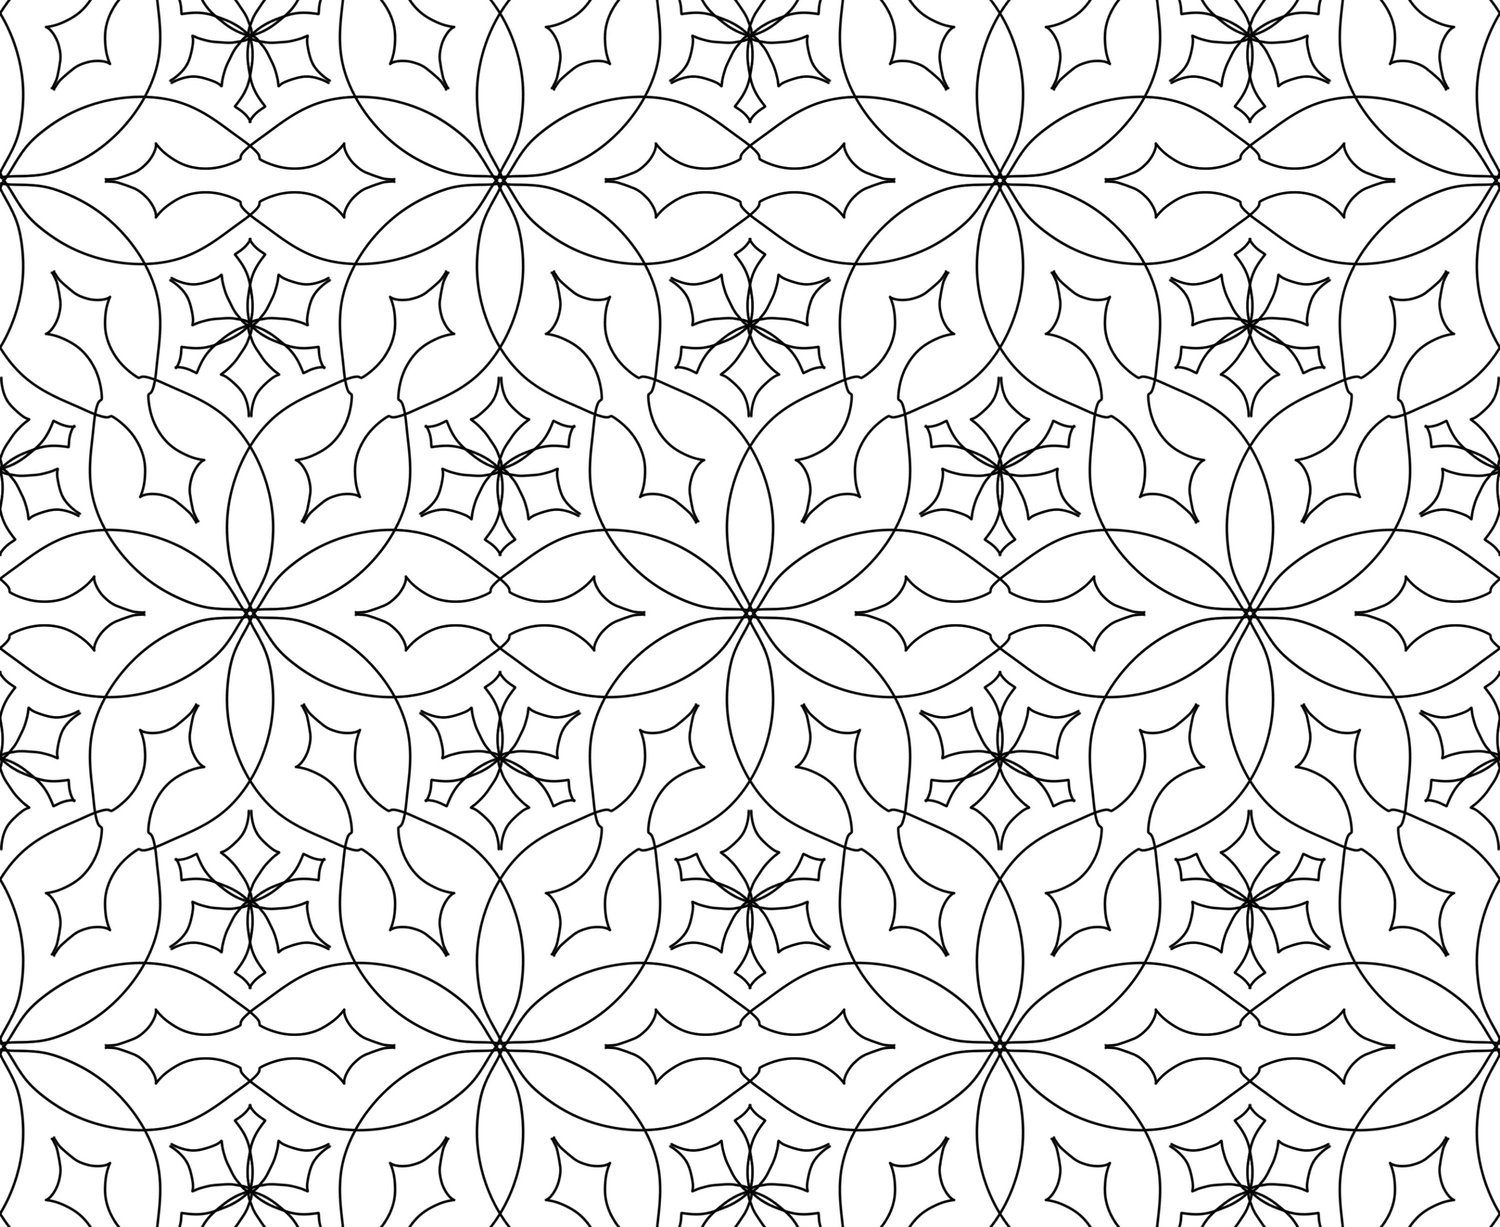 Geometric coloring pages different full page pattern coloring book geometric pattern digital coloring book for adults relaxing pages